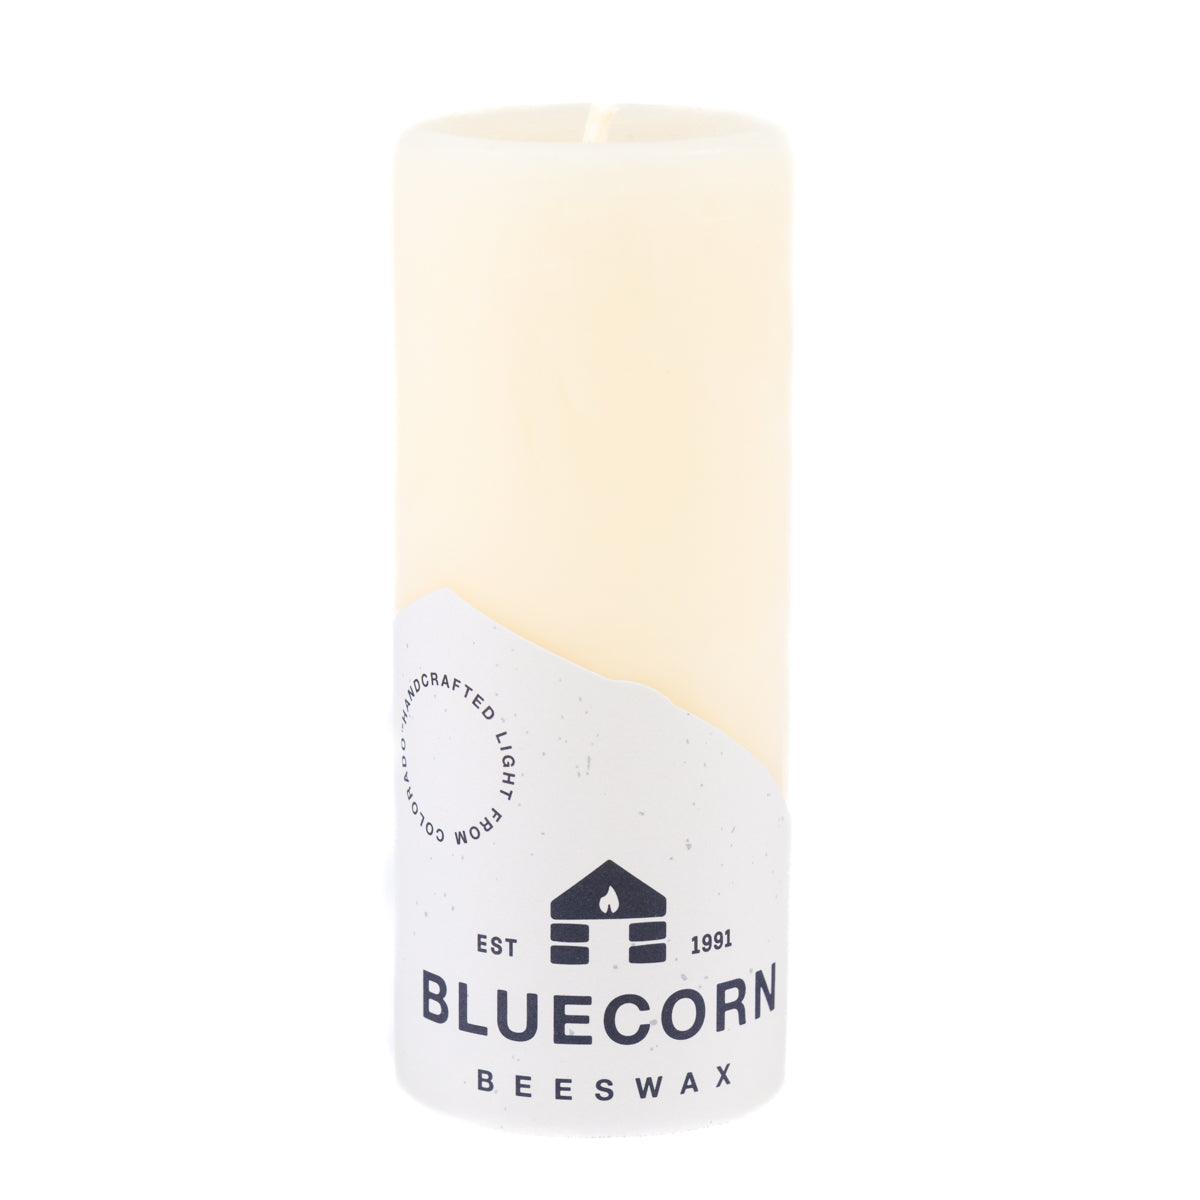 Bluecorn Beeswax 100% Pure Beeswax 2" x 4.5" Ivory Pillar Candle. Burn Time: 36 hours. Made with 100% Pure Beeswax, wax is white in color. Made with 100% pure cotton wick, no lead and paraffin free. Clean burning and non-toxic. Features Bluecorn Beeswax label printed on 100% recycled paper. Clearance items might have an odd blemish or air bubble, but will still burn beautifully.